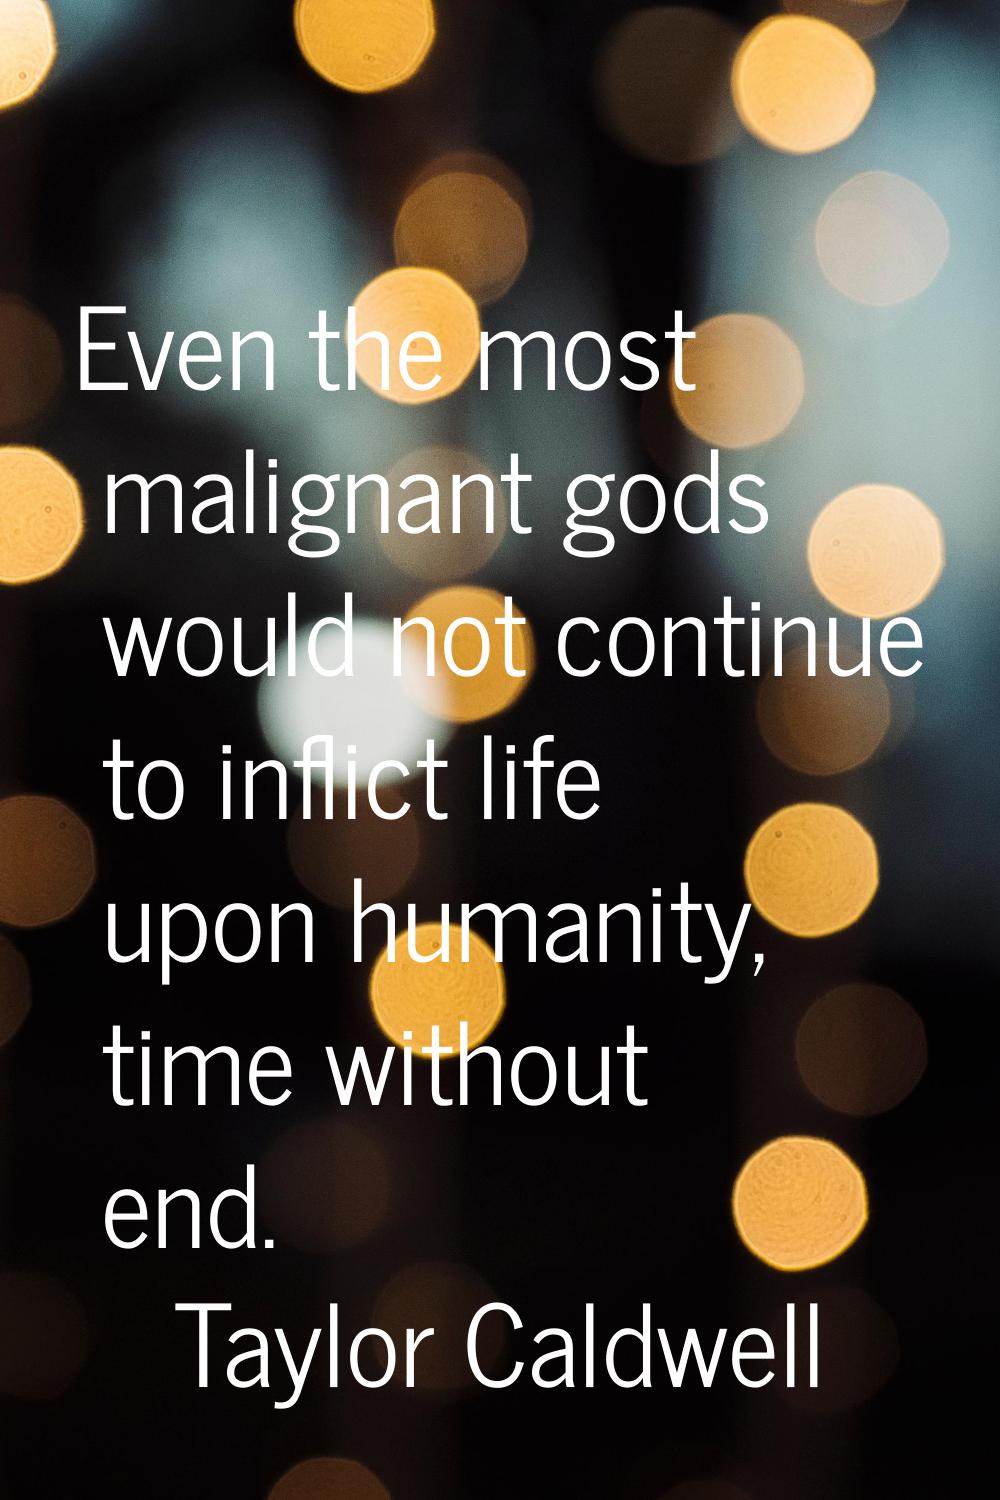 Even the most malignant gods would not continue to inflict life upon humanity, time without end.